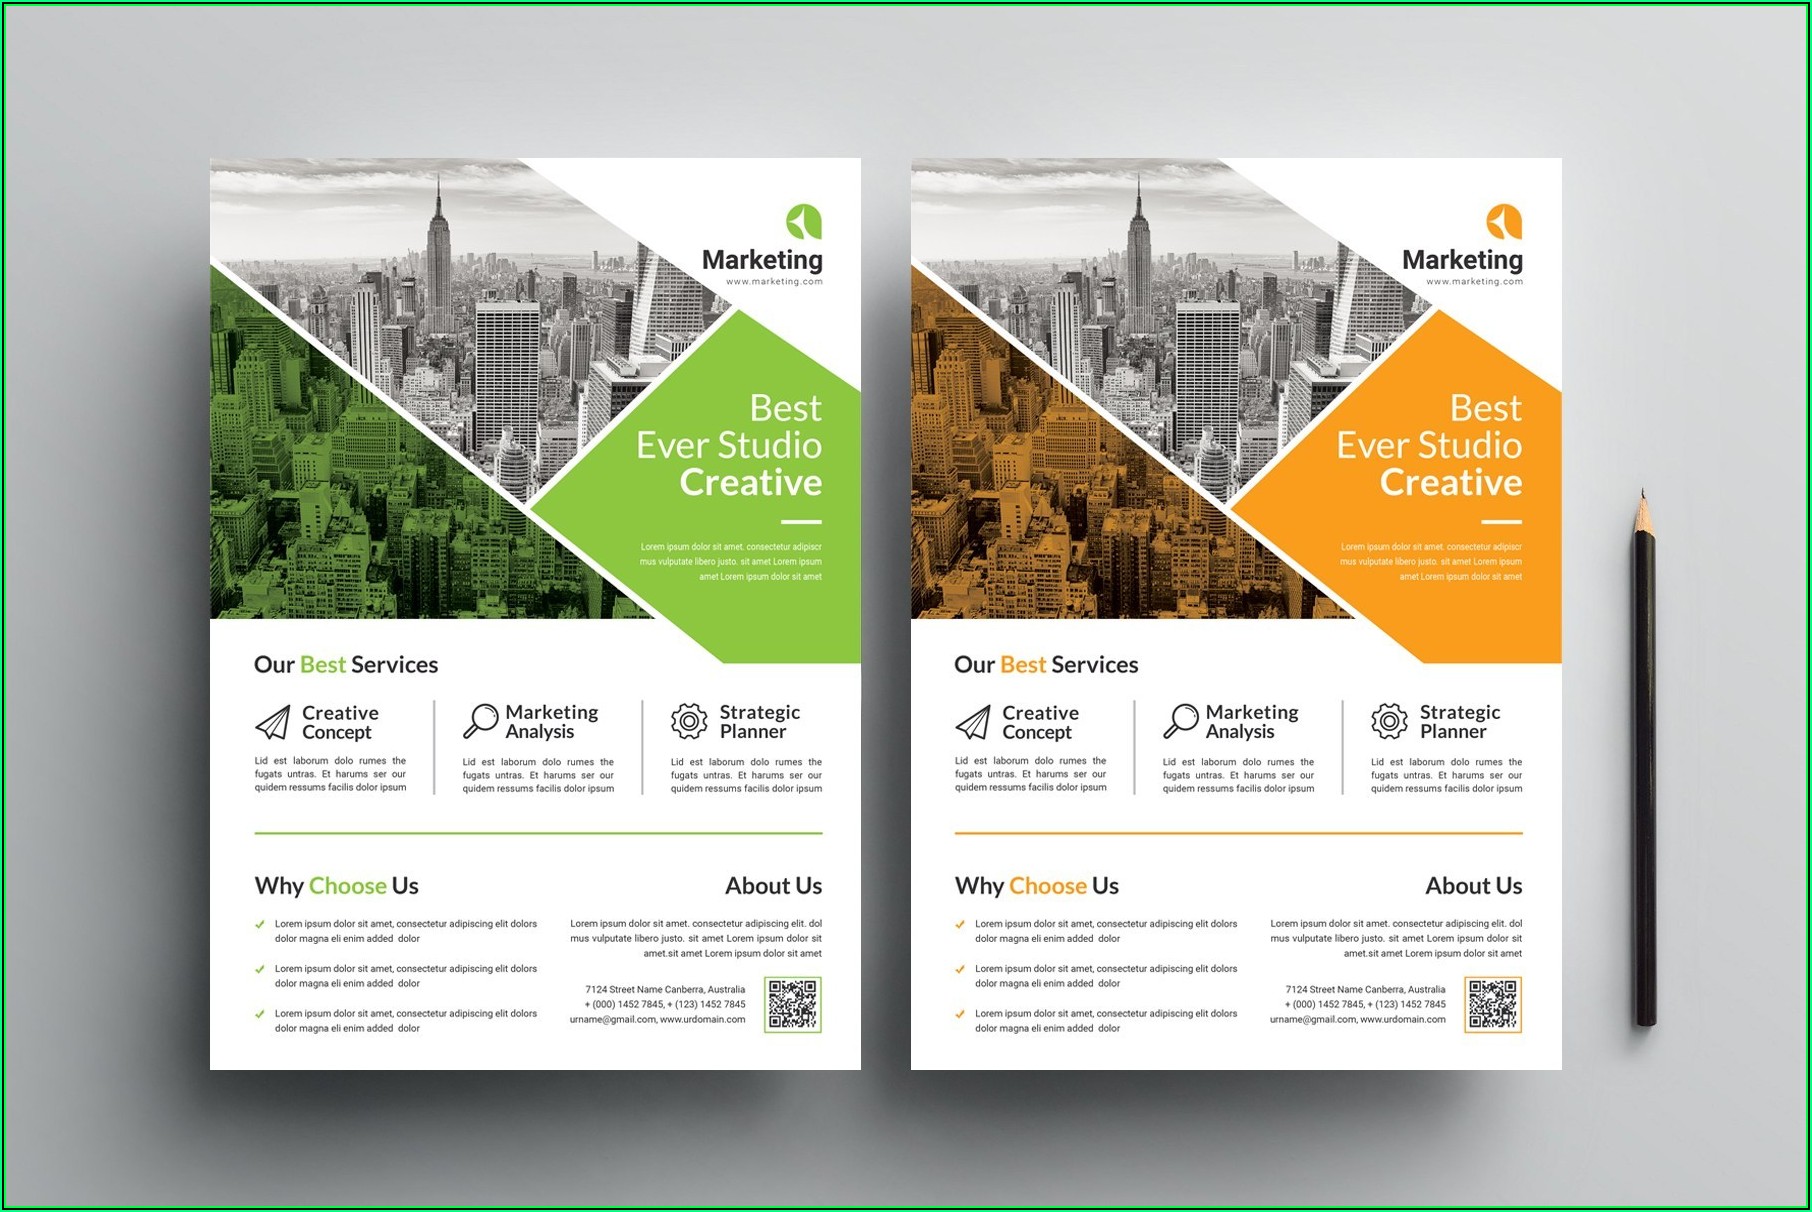 Professional Flyer Templates